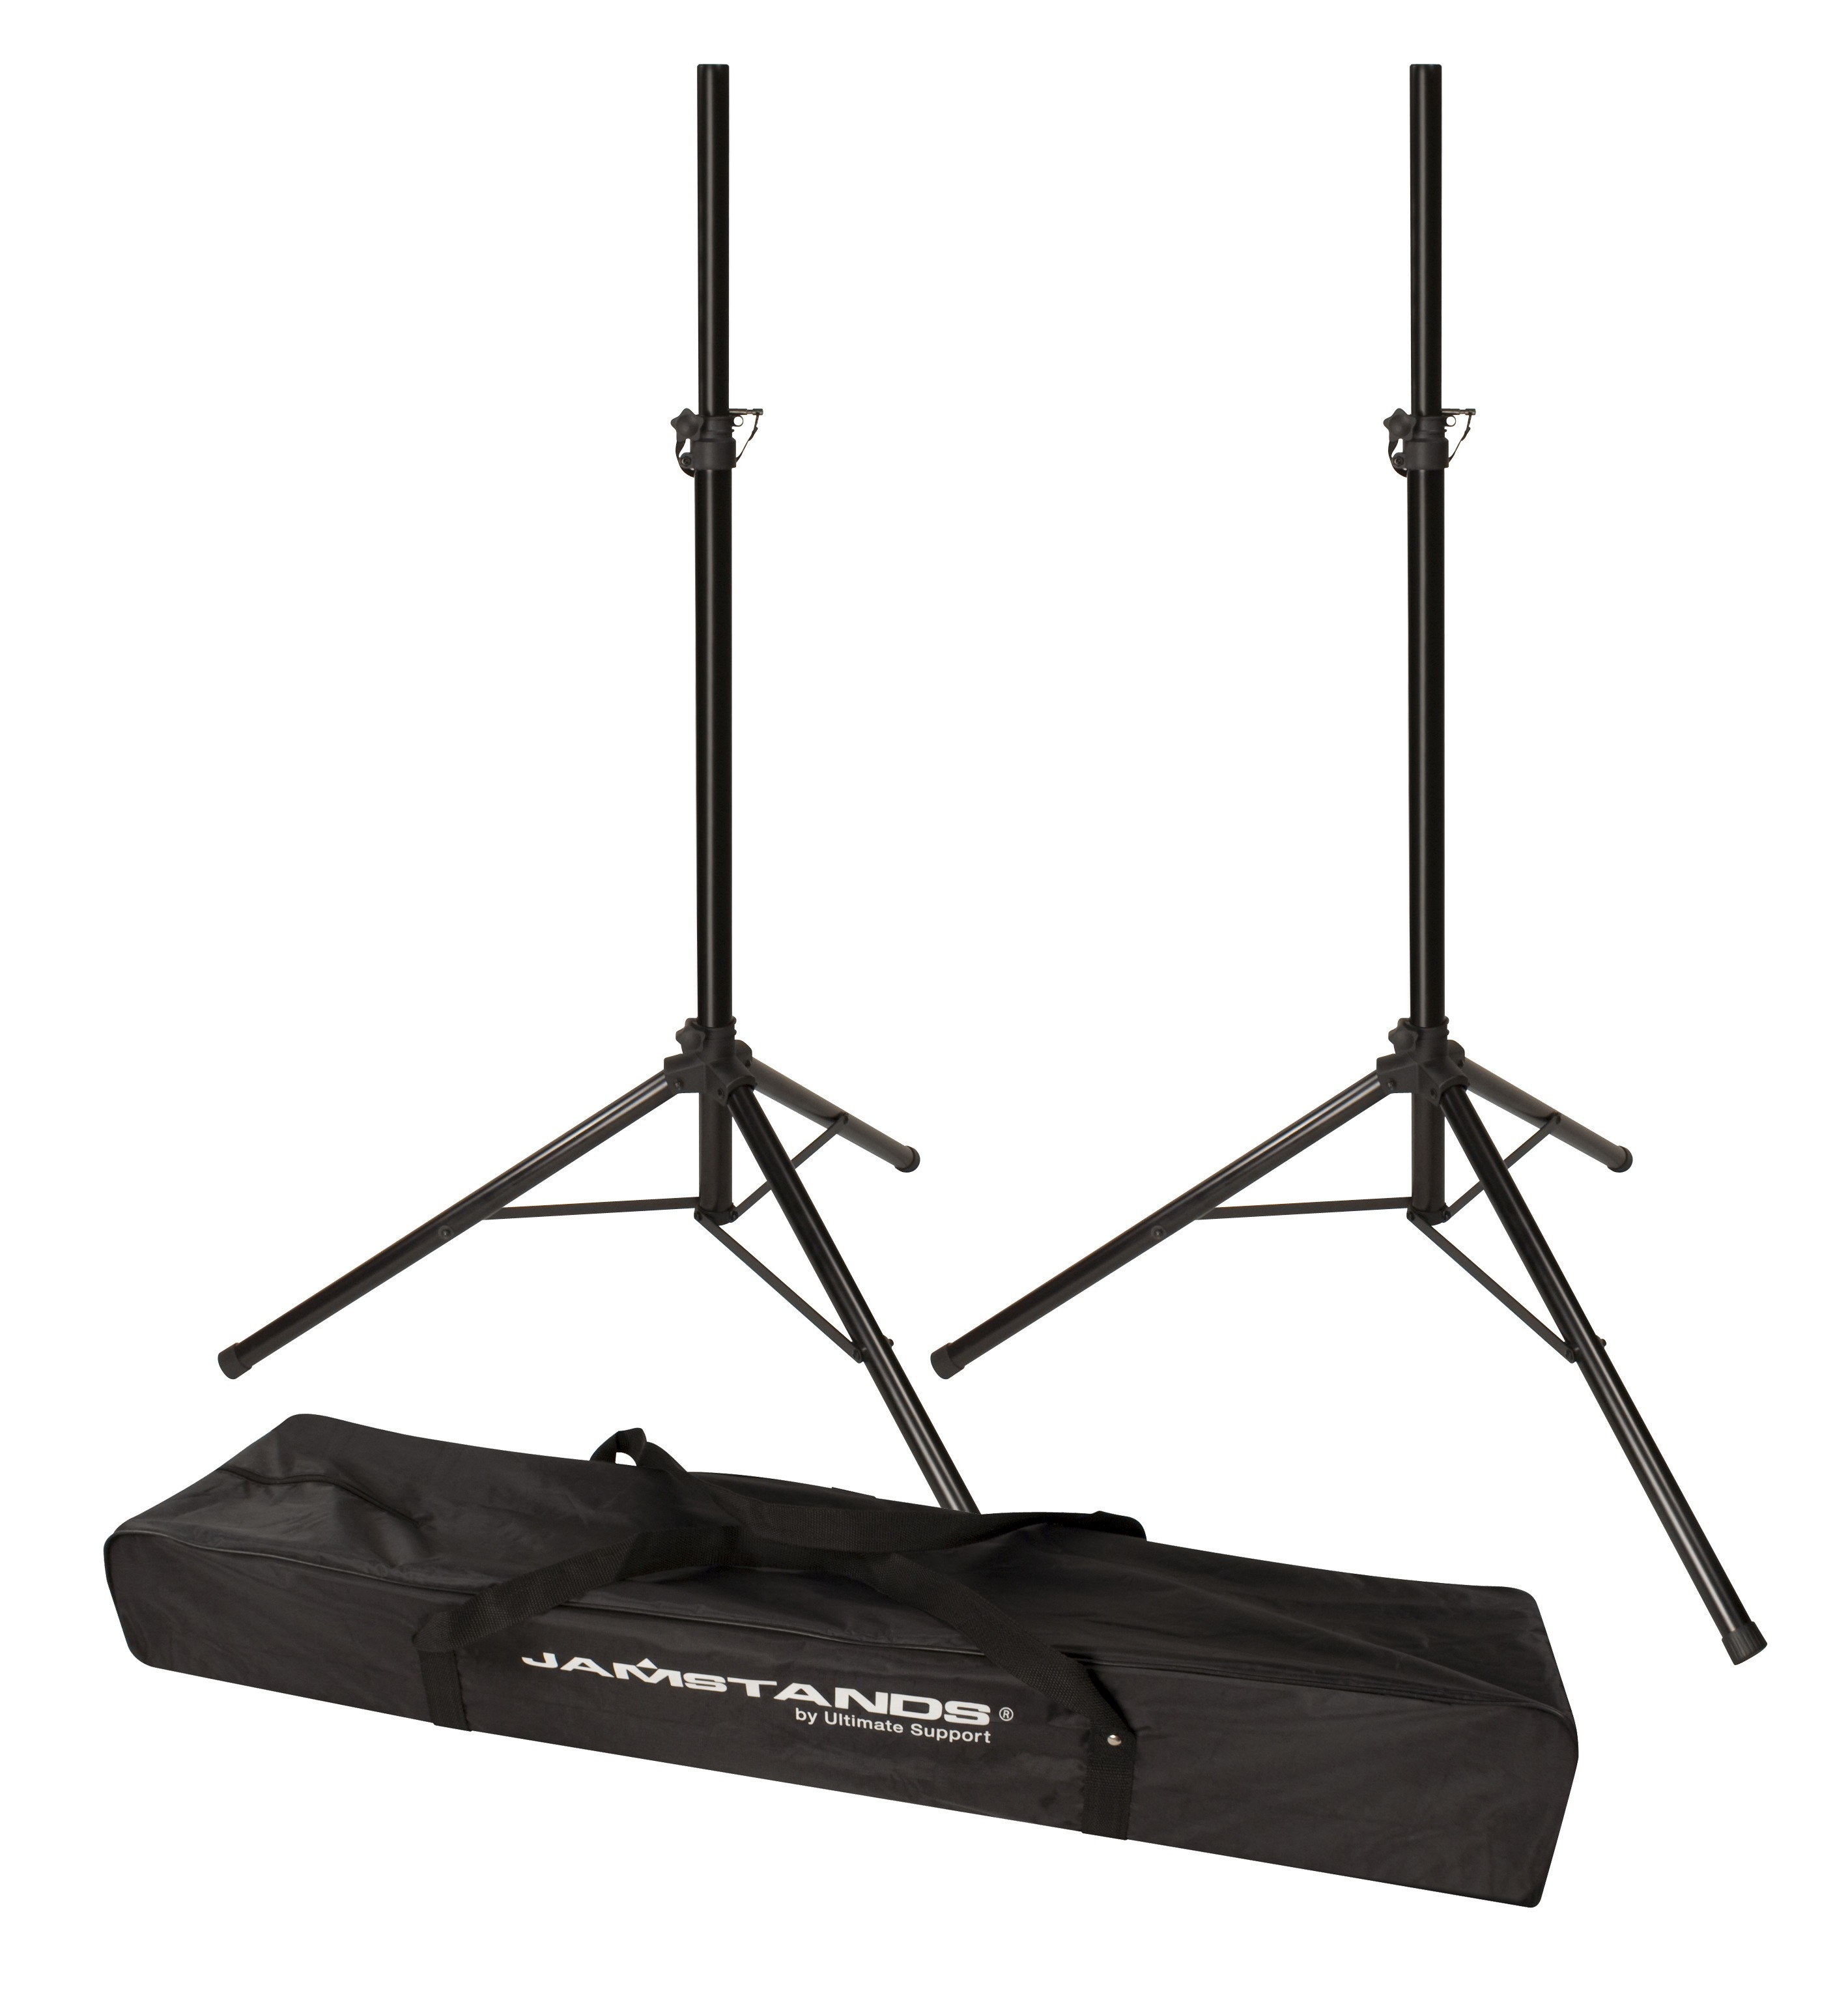 JamStands by Ultimate Support JamStands TS40 Tripod Stand for Speaker - Black